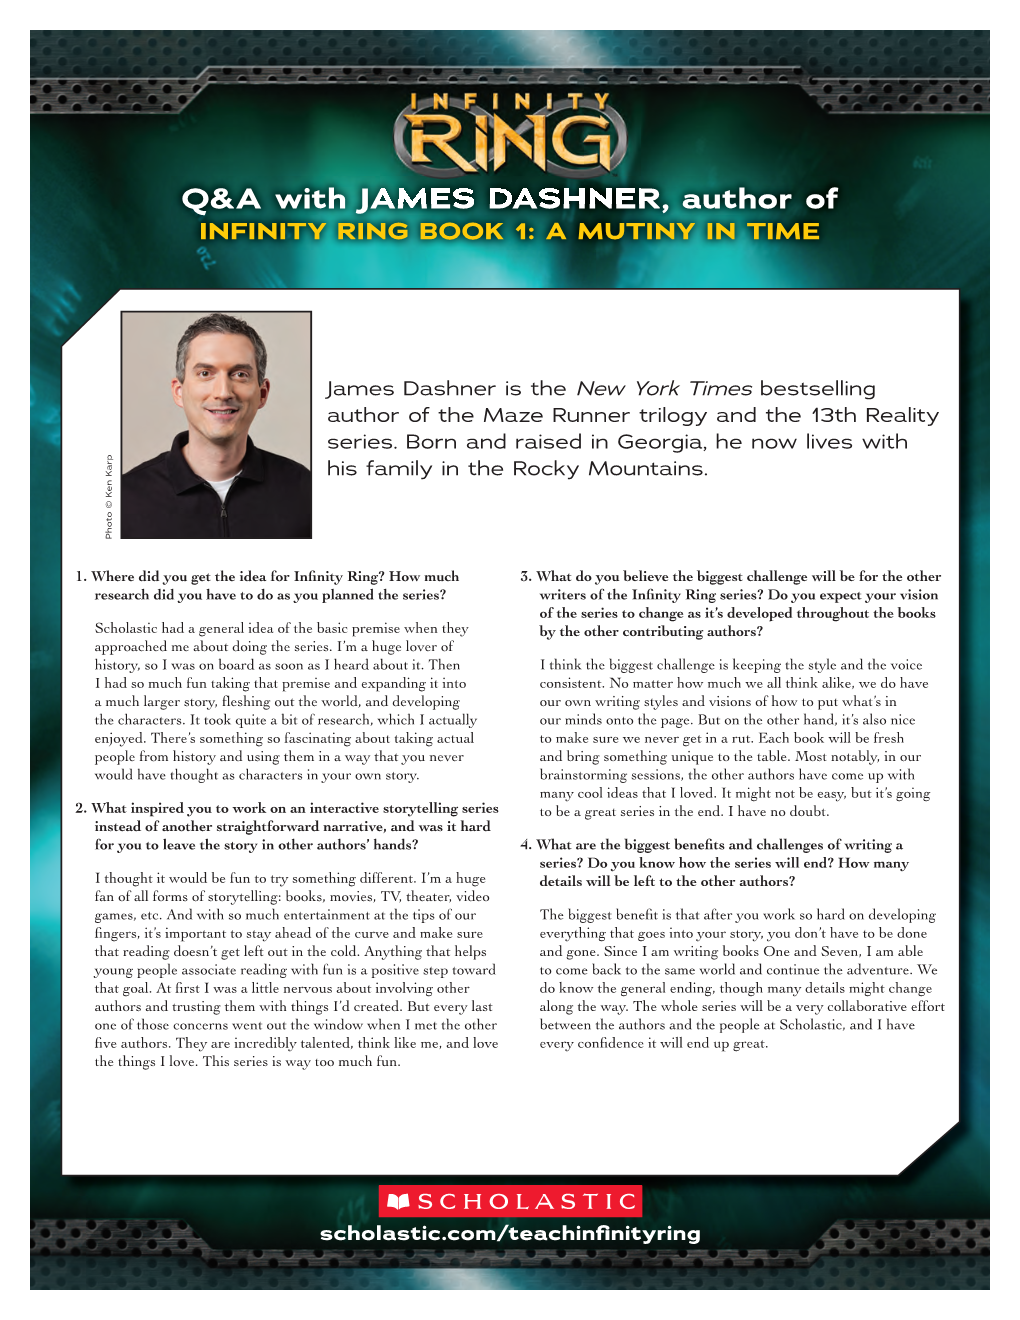 Q&A with JAMES DASHNER, Author Of